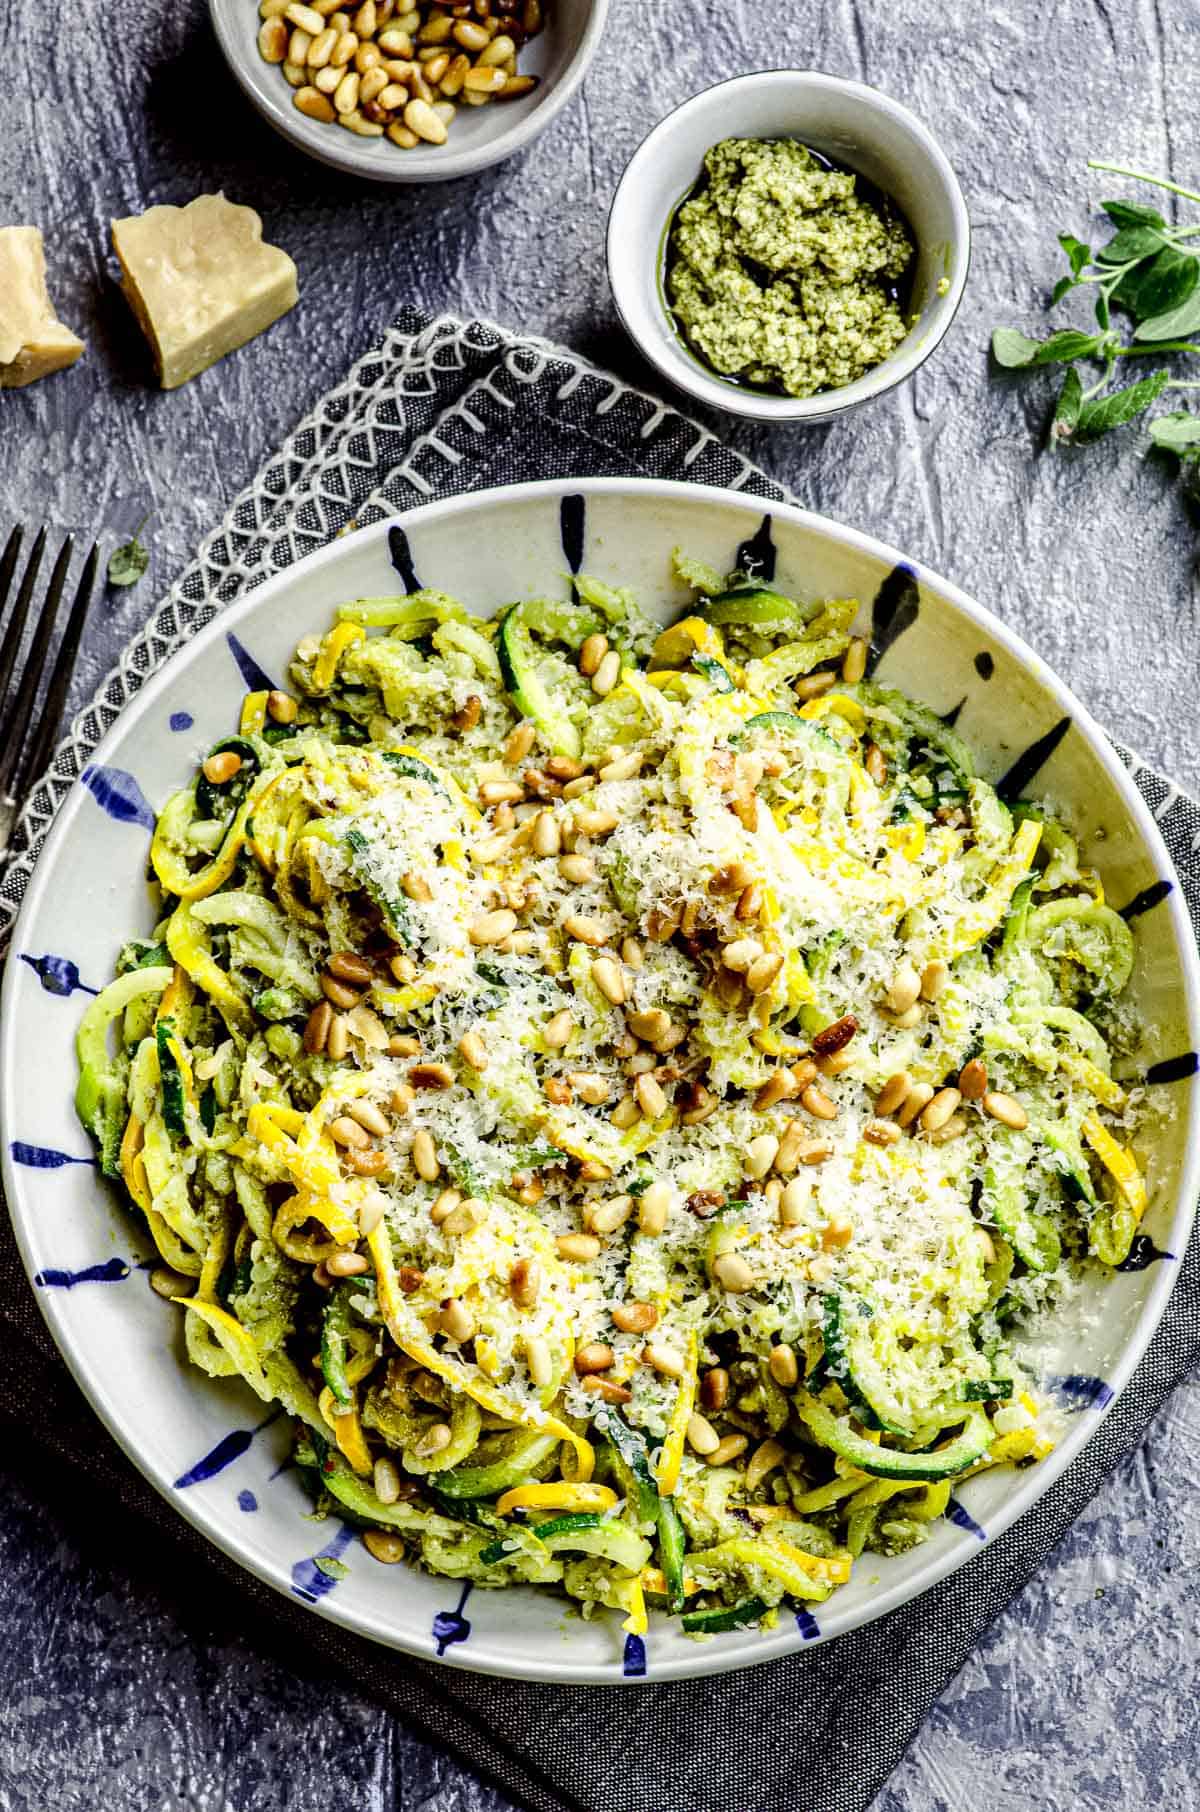 The Best Tools for Spiralizing Zucchini